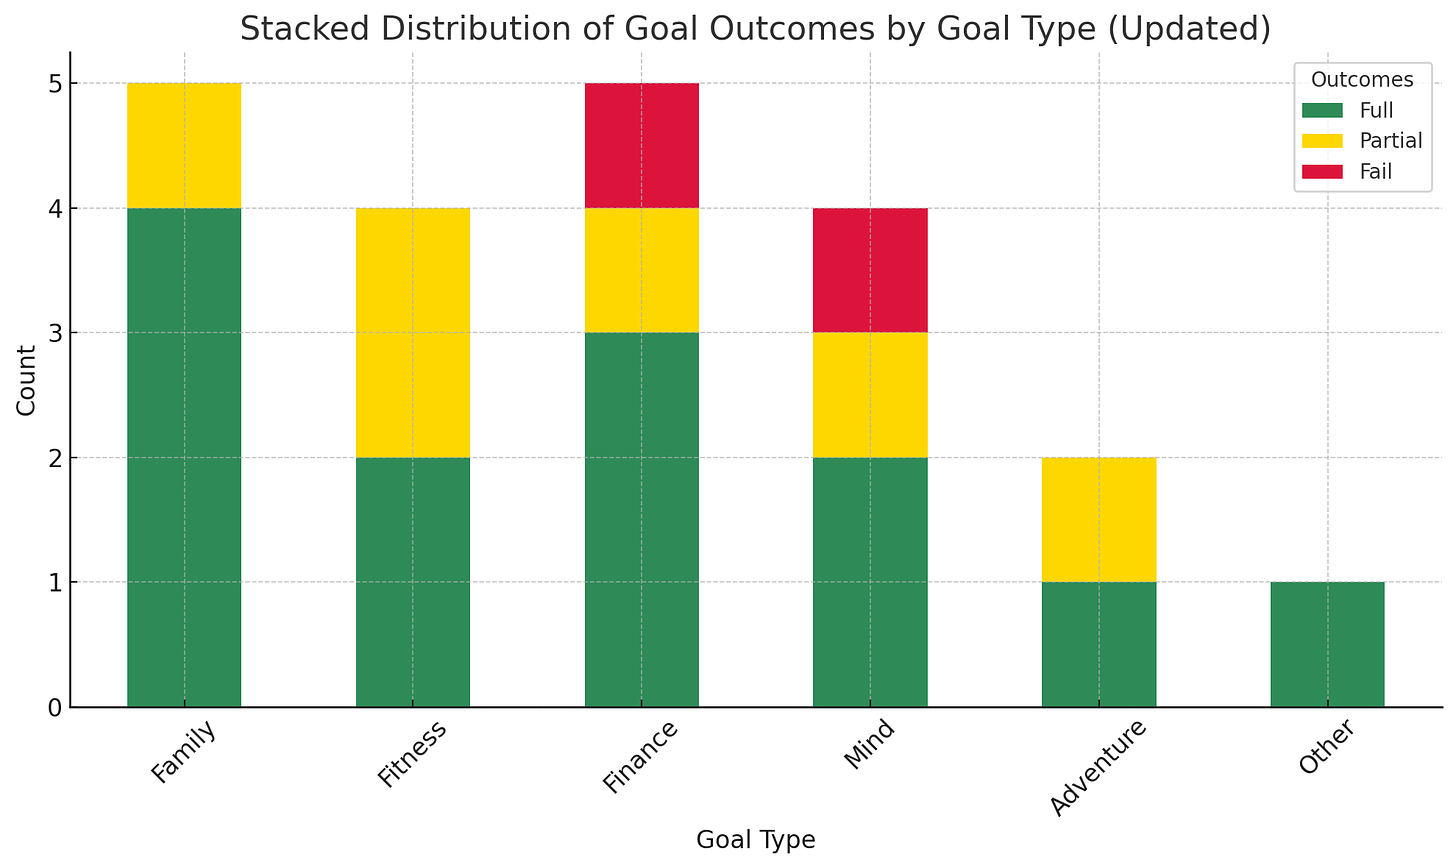 Distribution of met, partially met, and failed goals in each goal area.